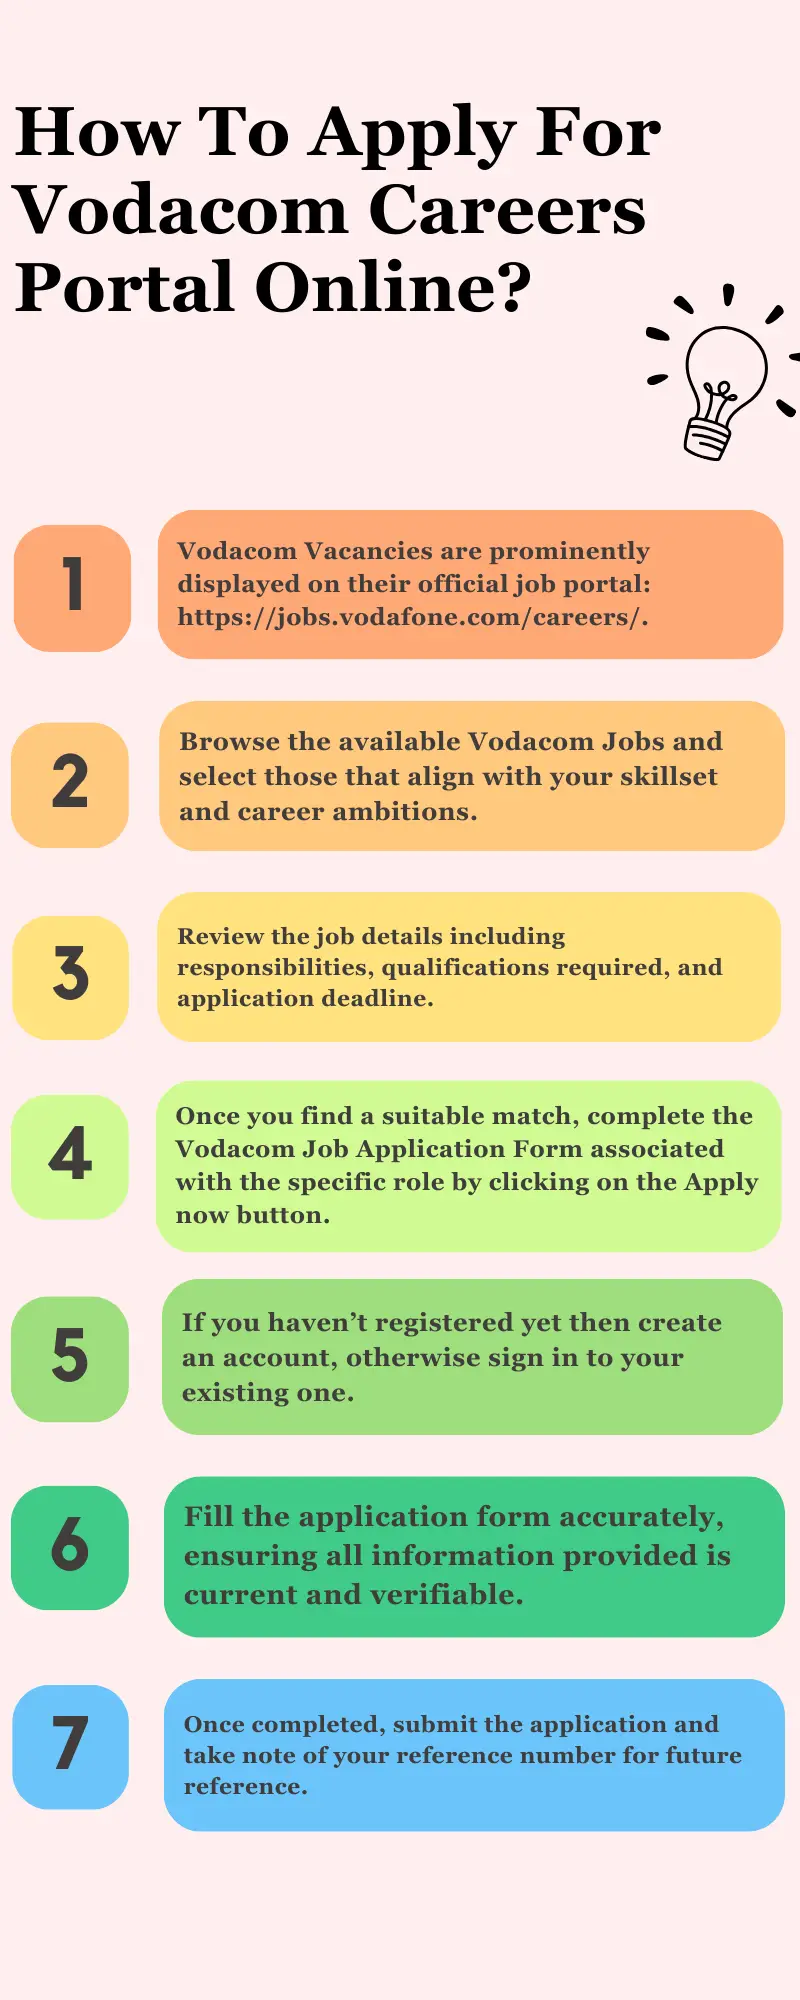 How To Apply For Vodacom Careers Portal Online?